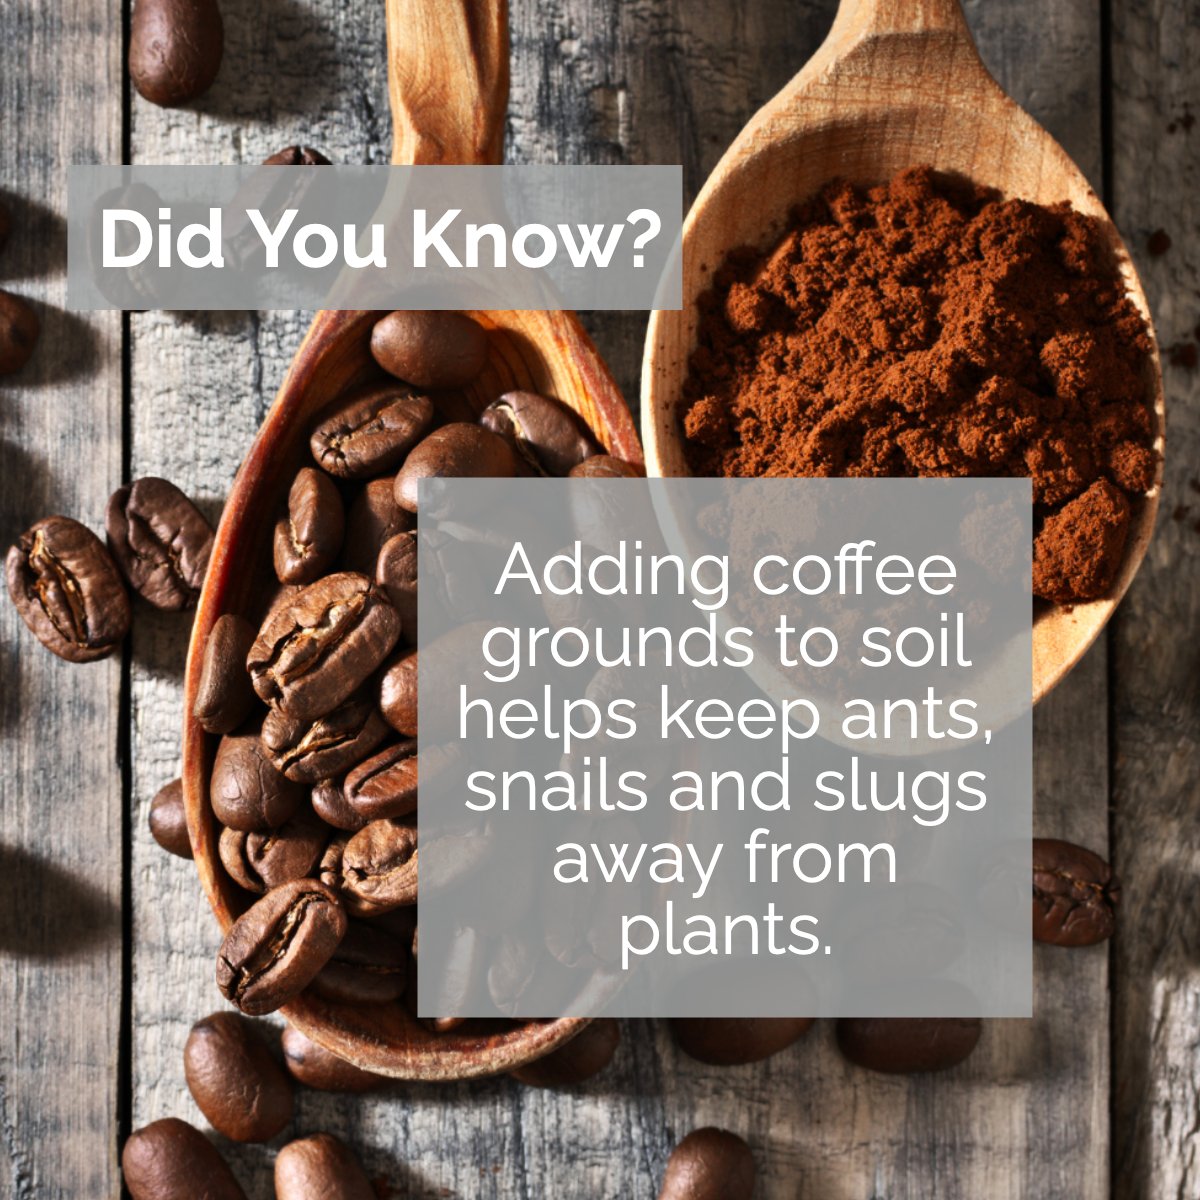 Coffee grounds are abrasive, so a barrier of grounds placed near slug-prone plants may just save them from garden pests.  🌻🌷🌿

#coffeeground      #gardeningtips      #gardeninglove      #mastergardeners      #gardeninspo      #organicgardening
#Realestate